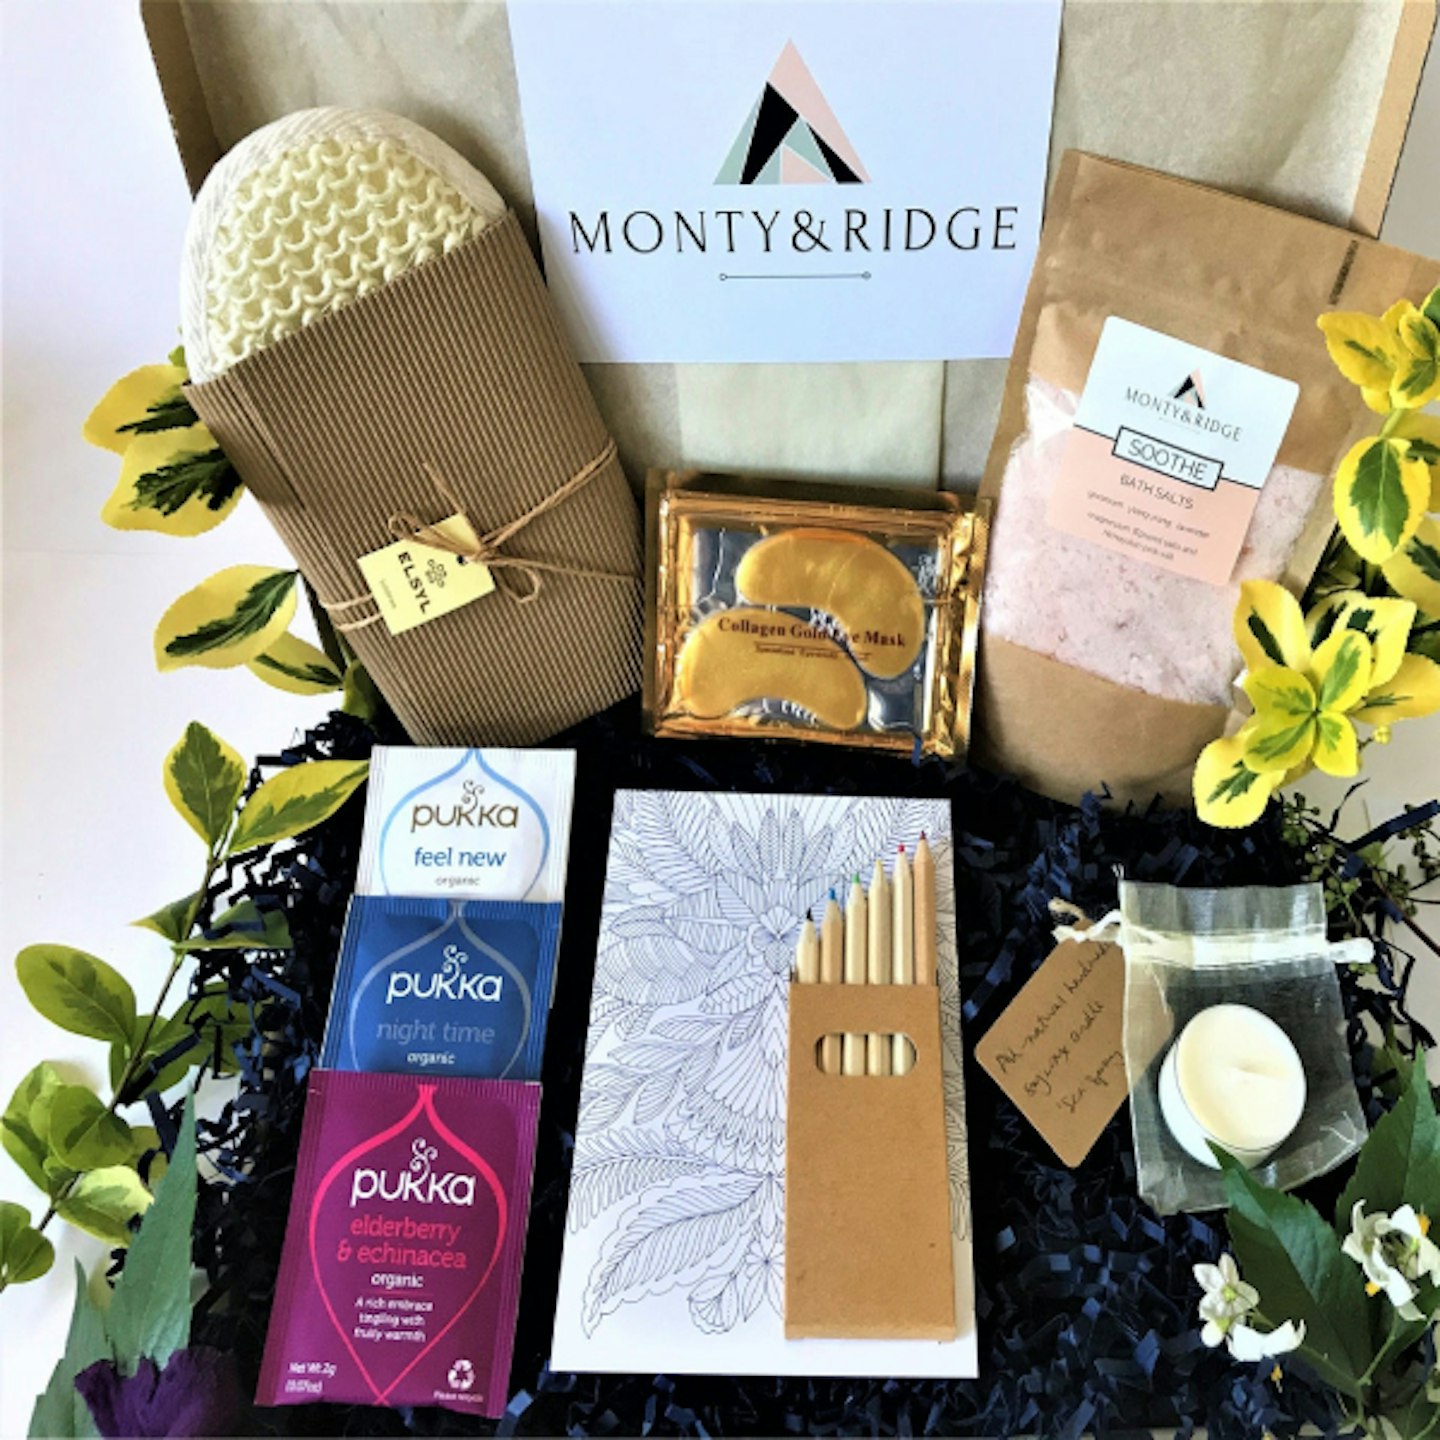 An Etsy box for mindfulness including tea, colouring post card and bath salts